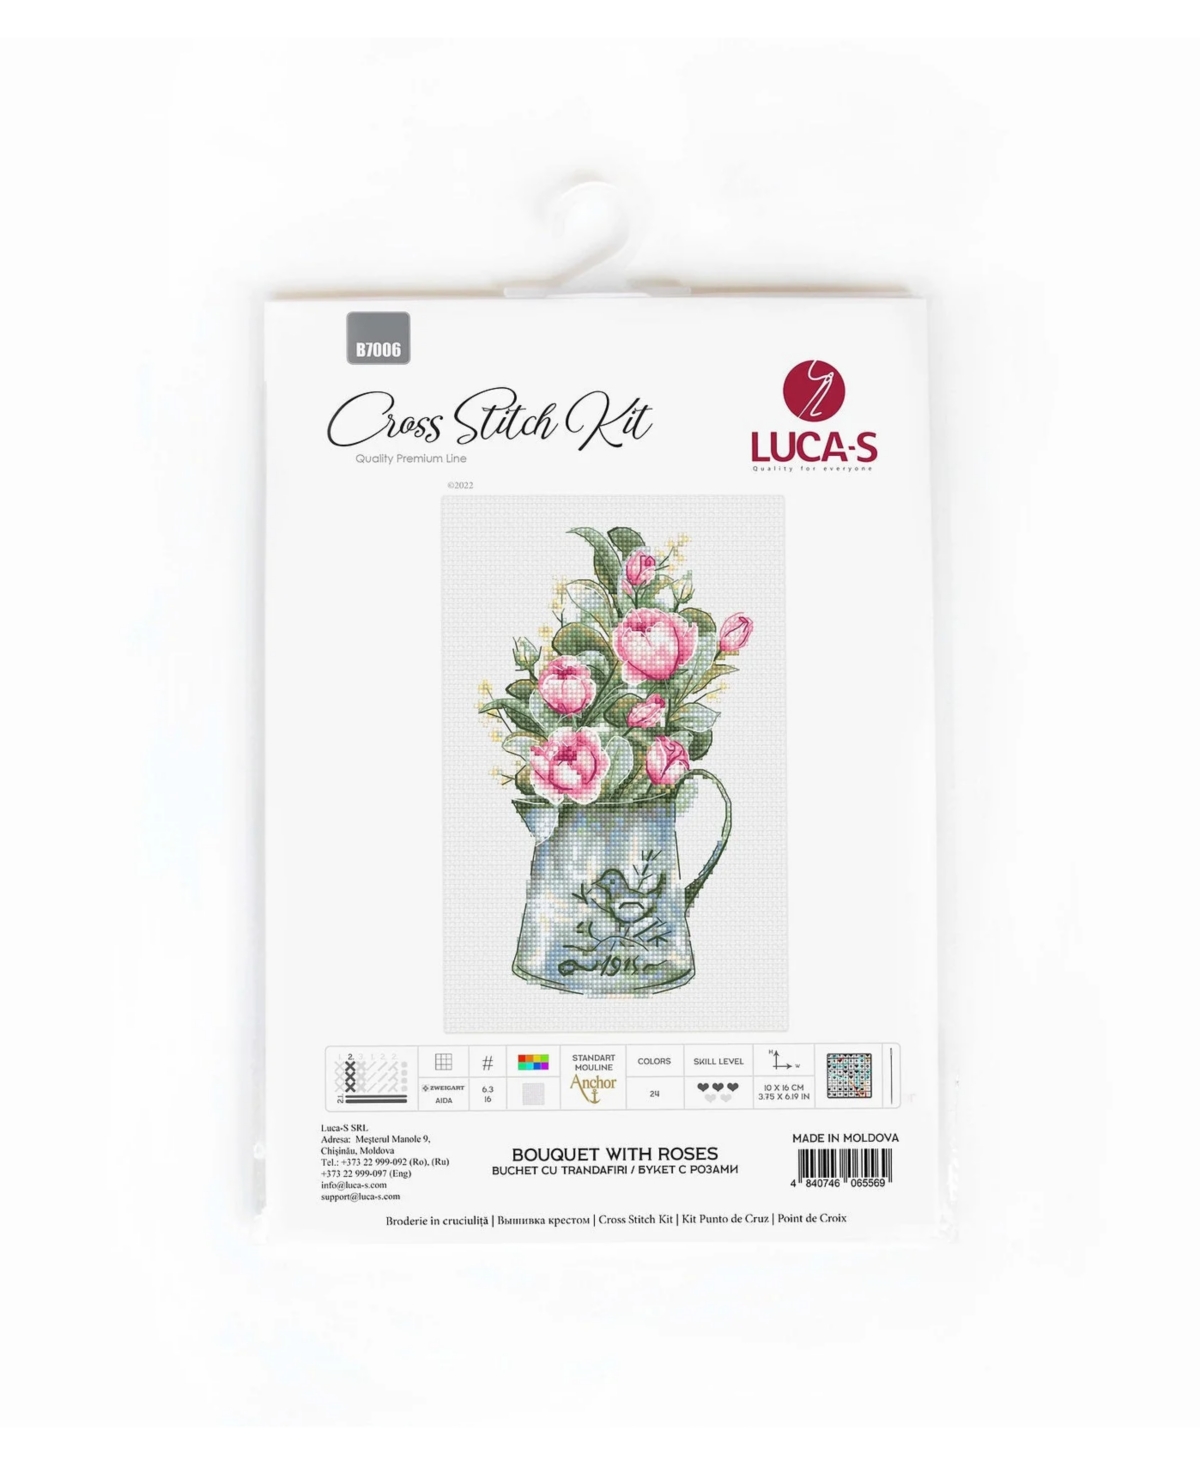 Luca-s Bouquet with roses B7006L Counted Cross-Stitch Kit